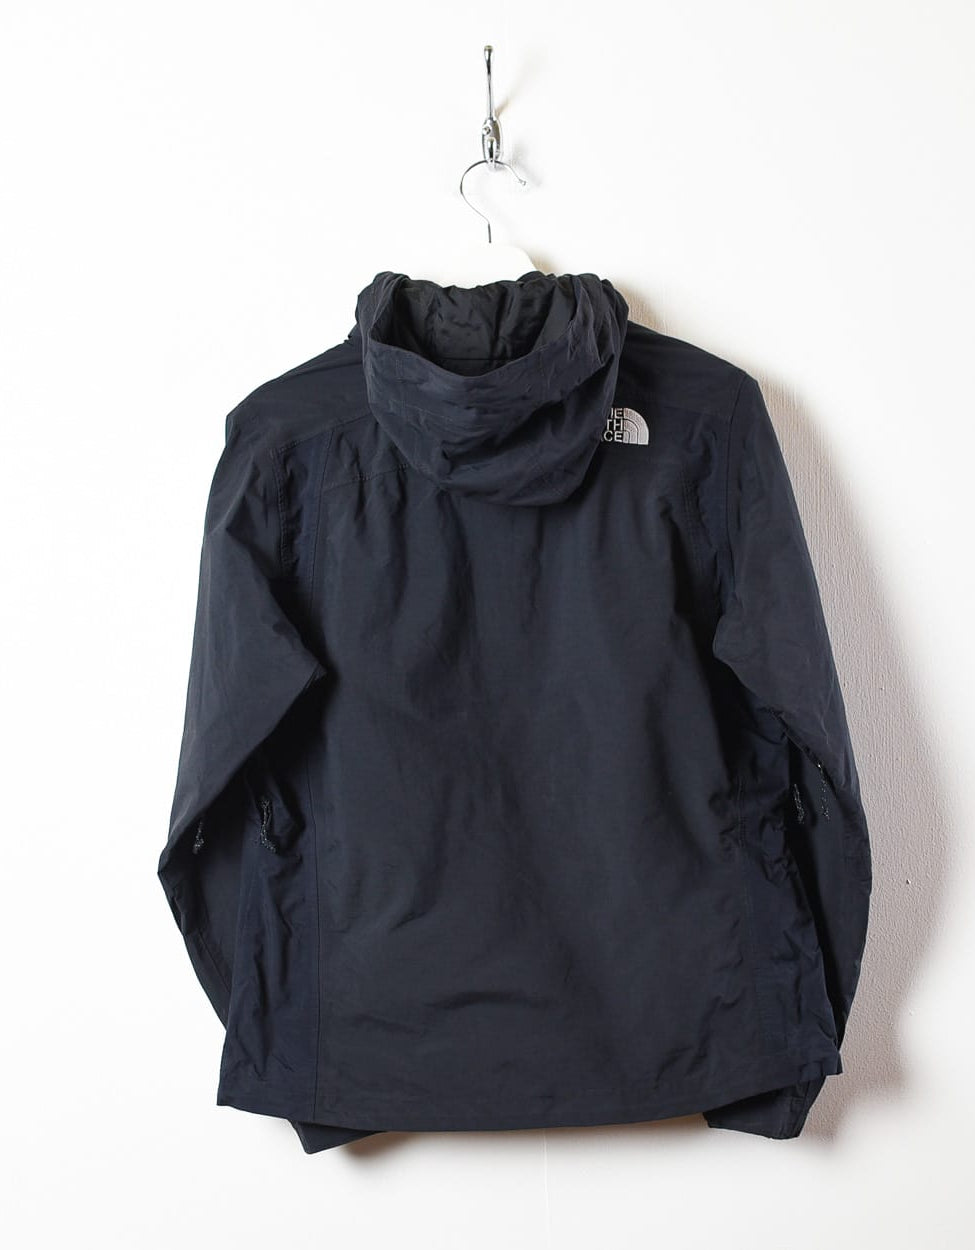 Black The North Face HyVent Hooded Windbreaker Jacket - Small Women's